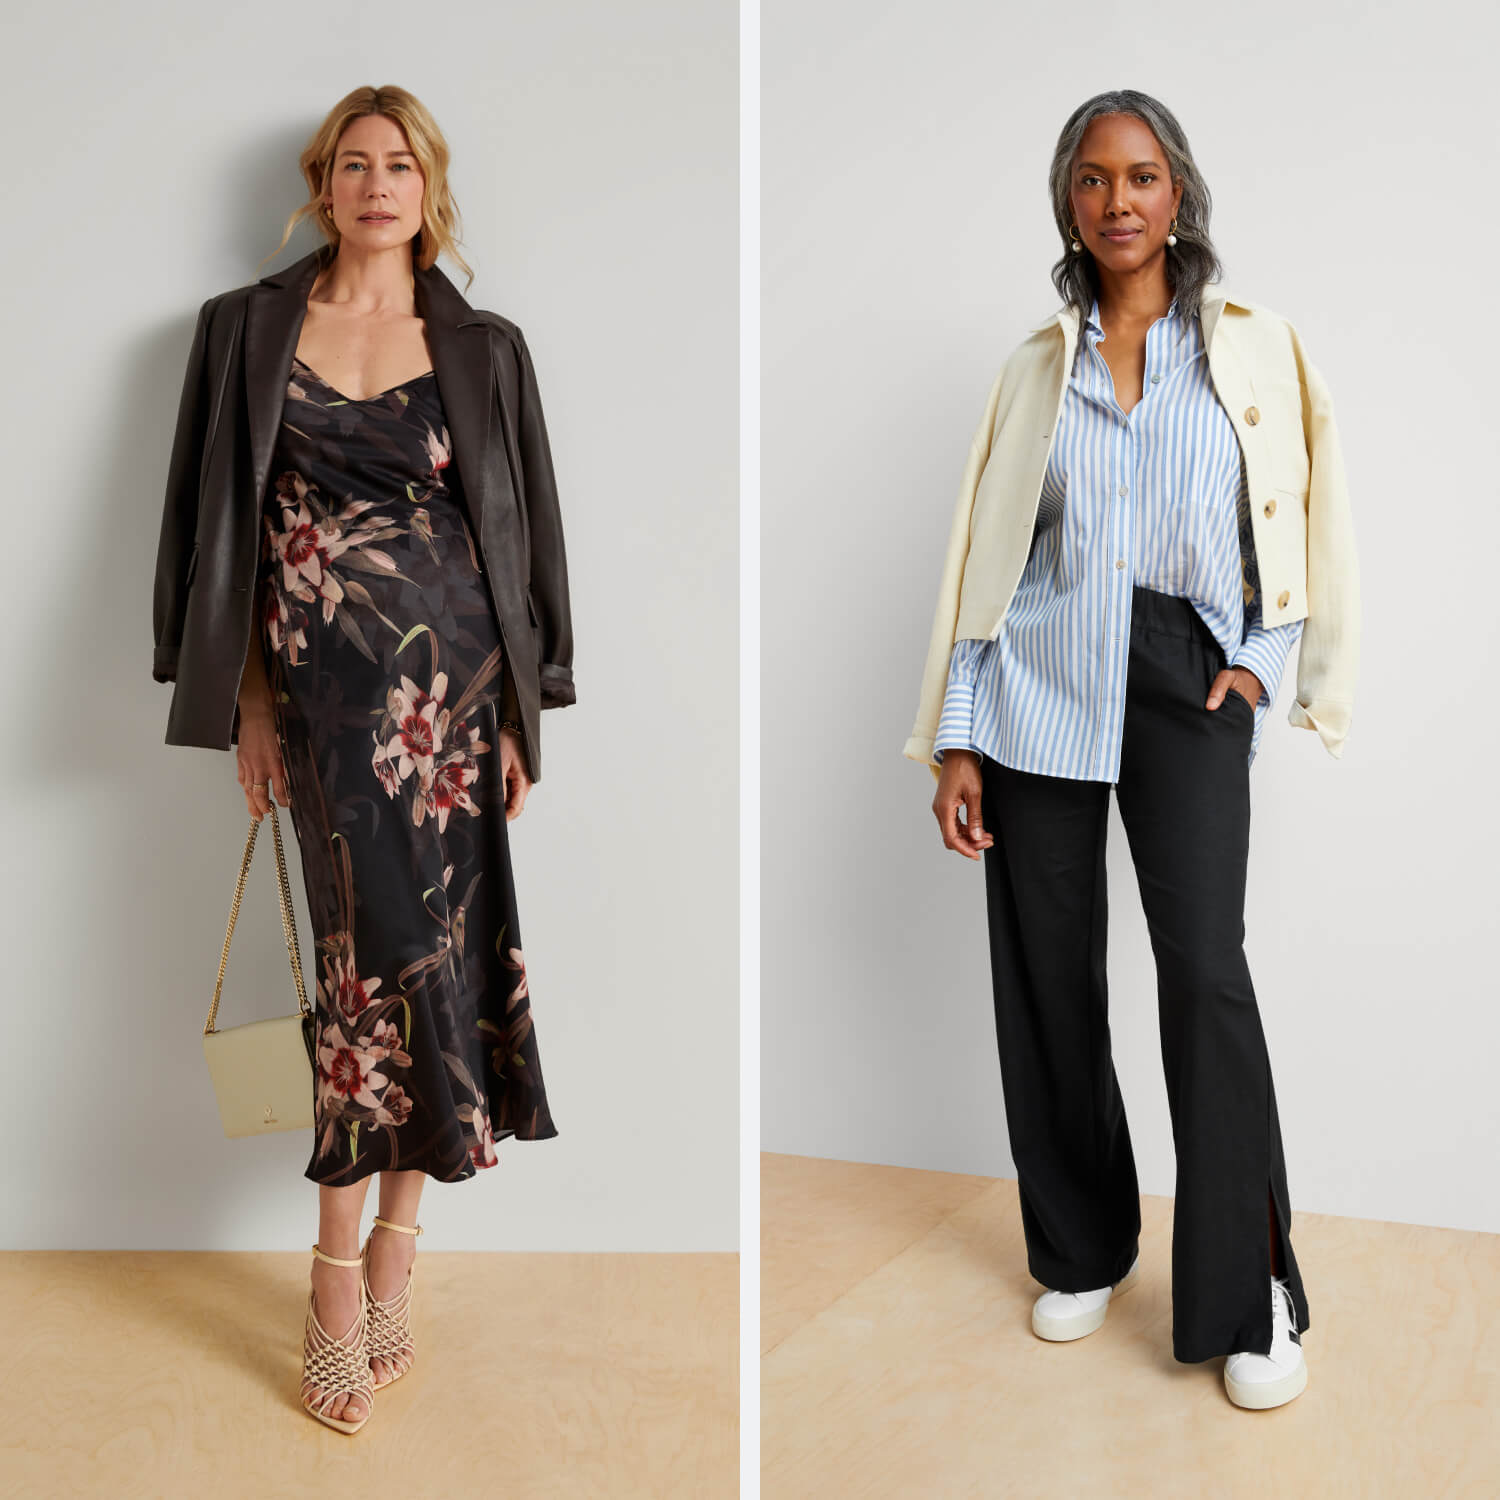 5 Outfit Ideas to Boost Confidence In Middle-Age Women